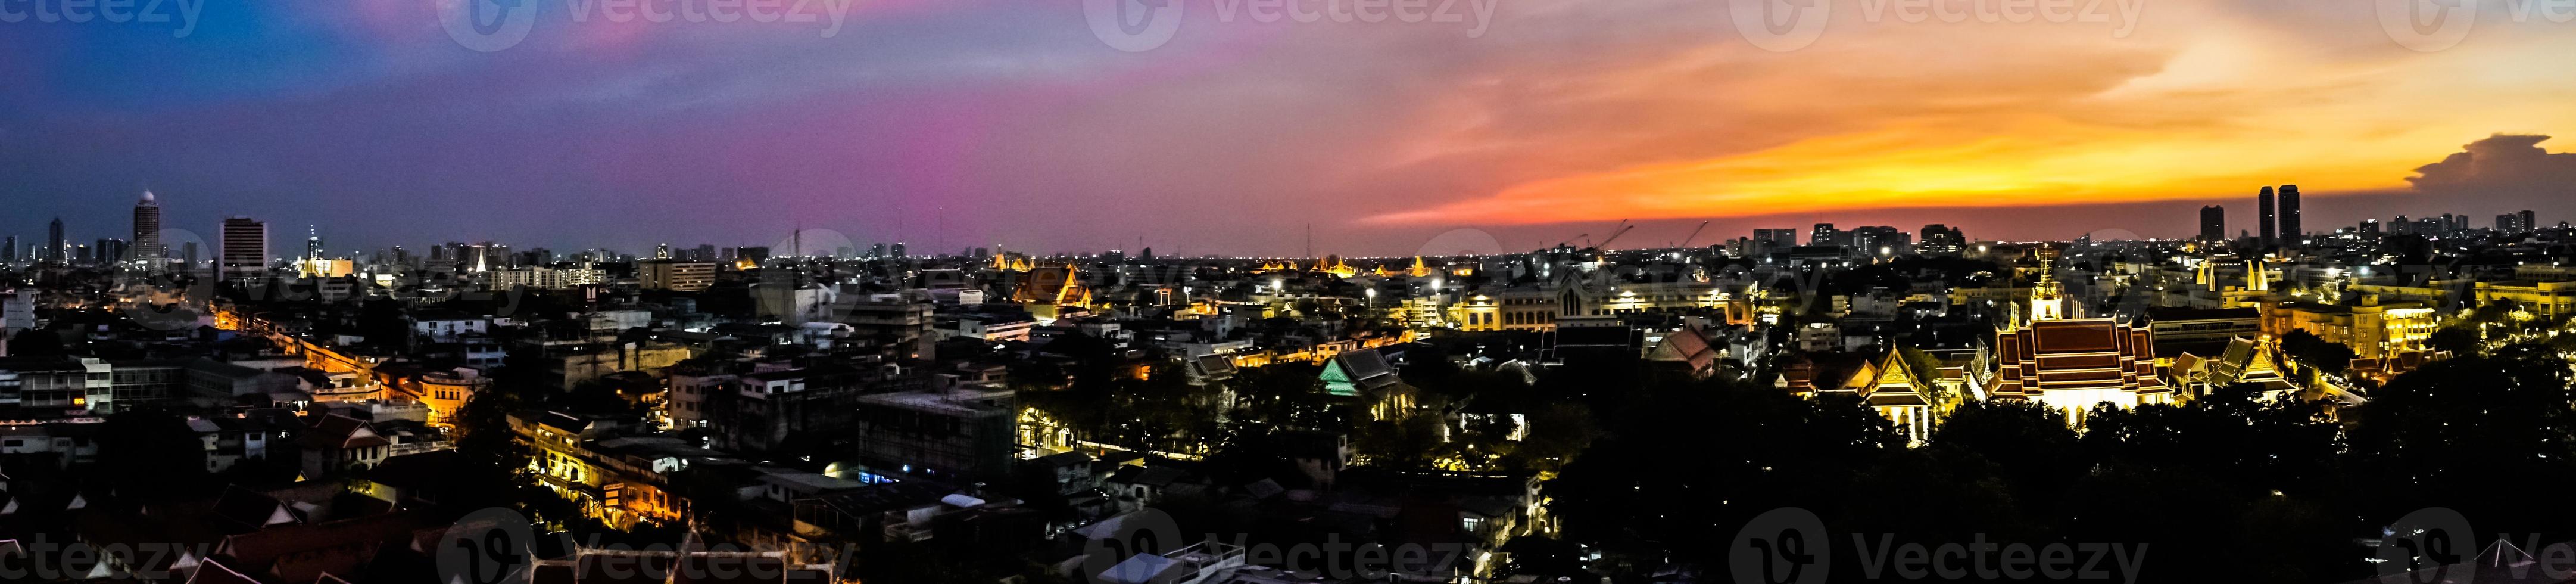 Overview cityscape with in twilight open sky. Bangkok city, Thailand. photo